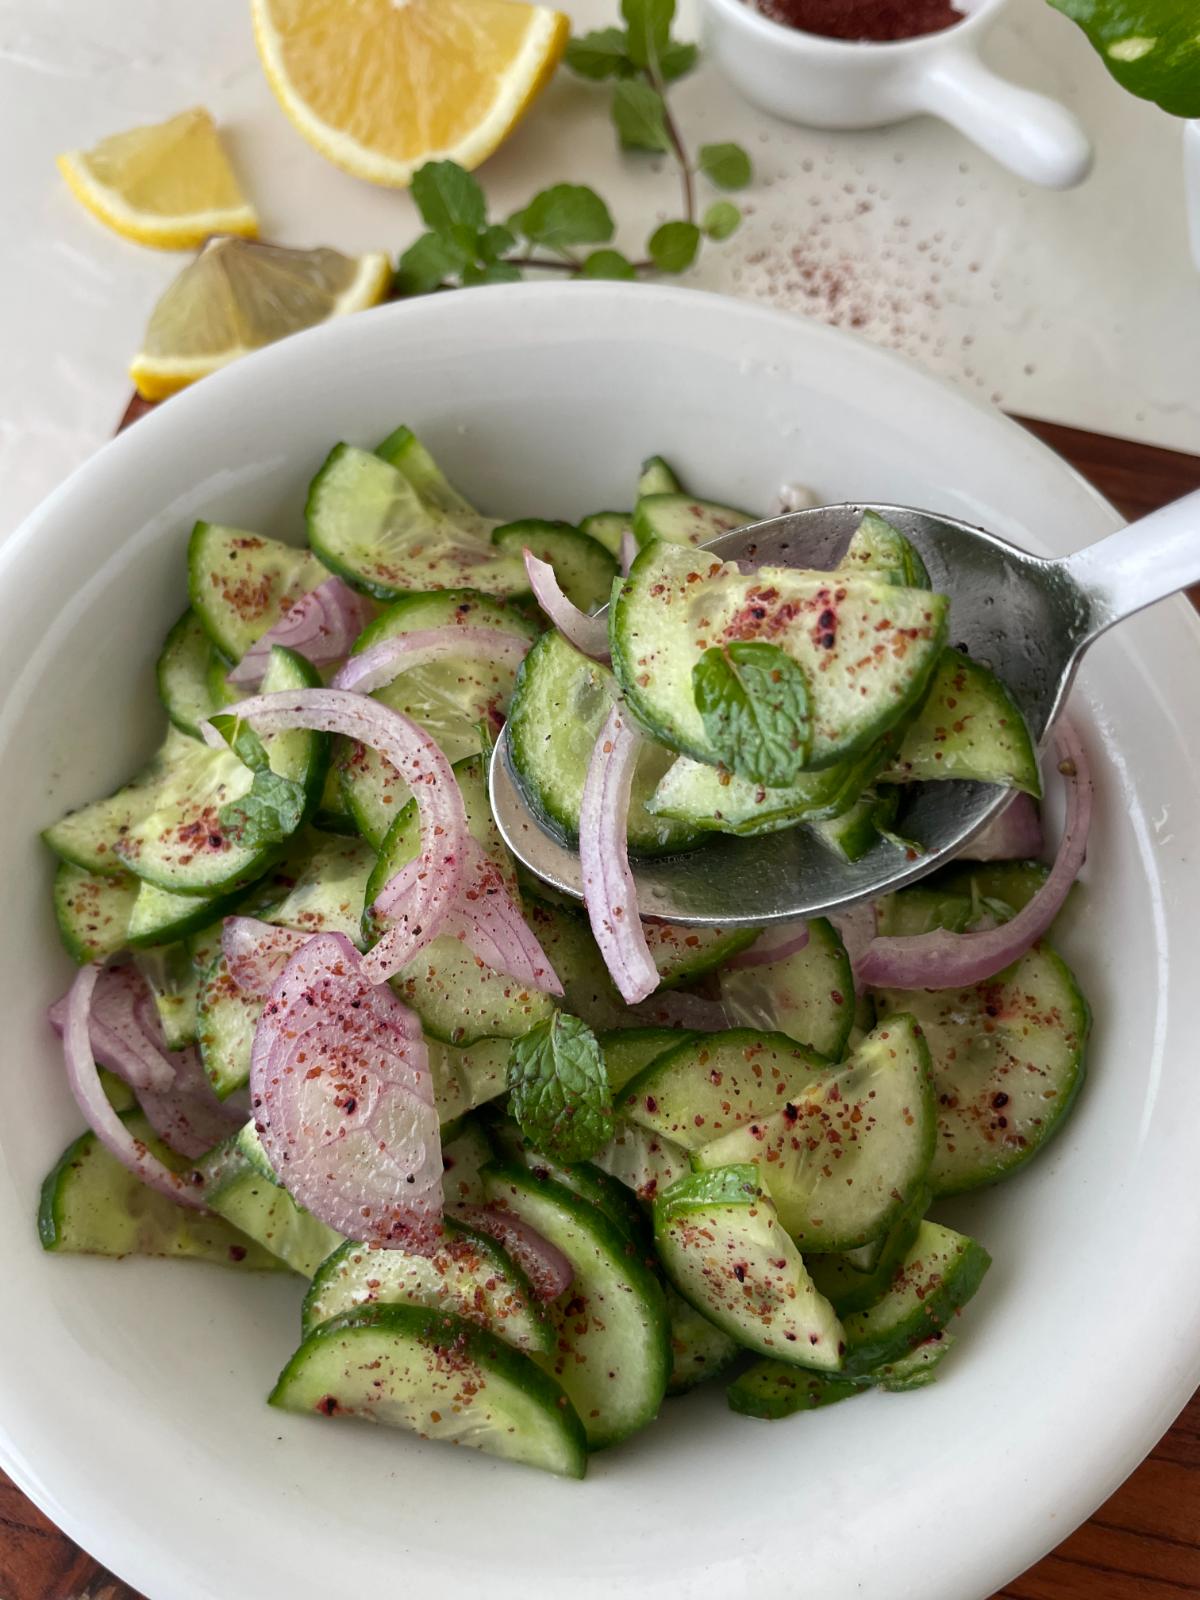 sumac cucumber salad being served in  a bowl